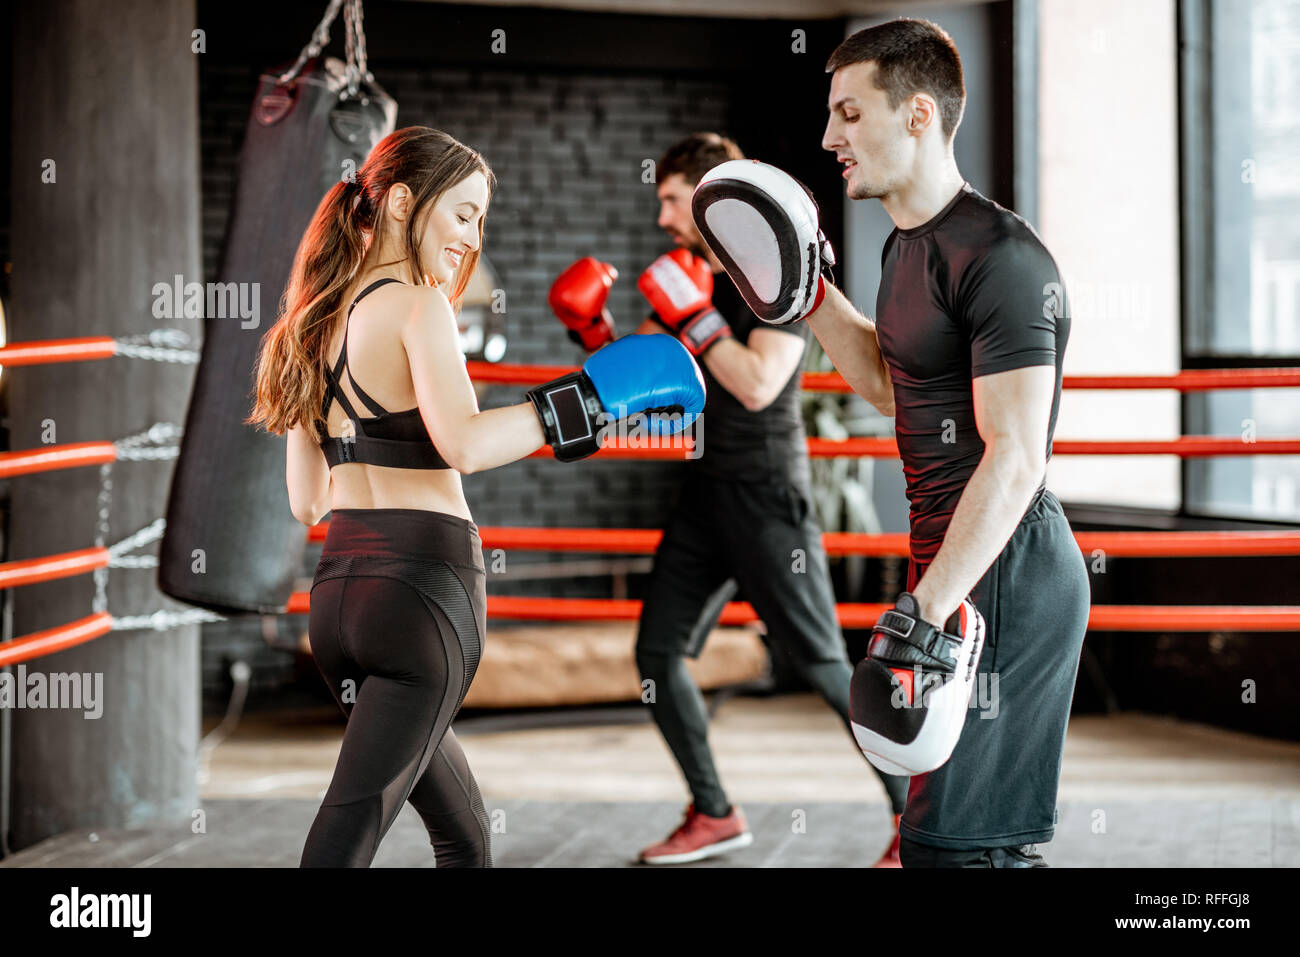 Boxing vs. Other Cardio Workouts: Which is More Effective?